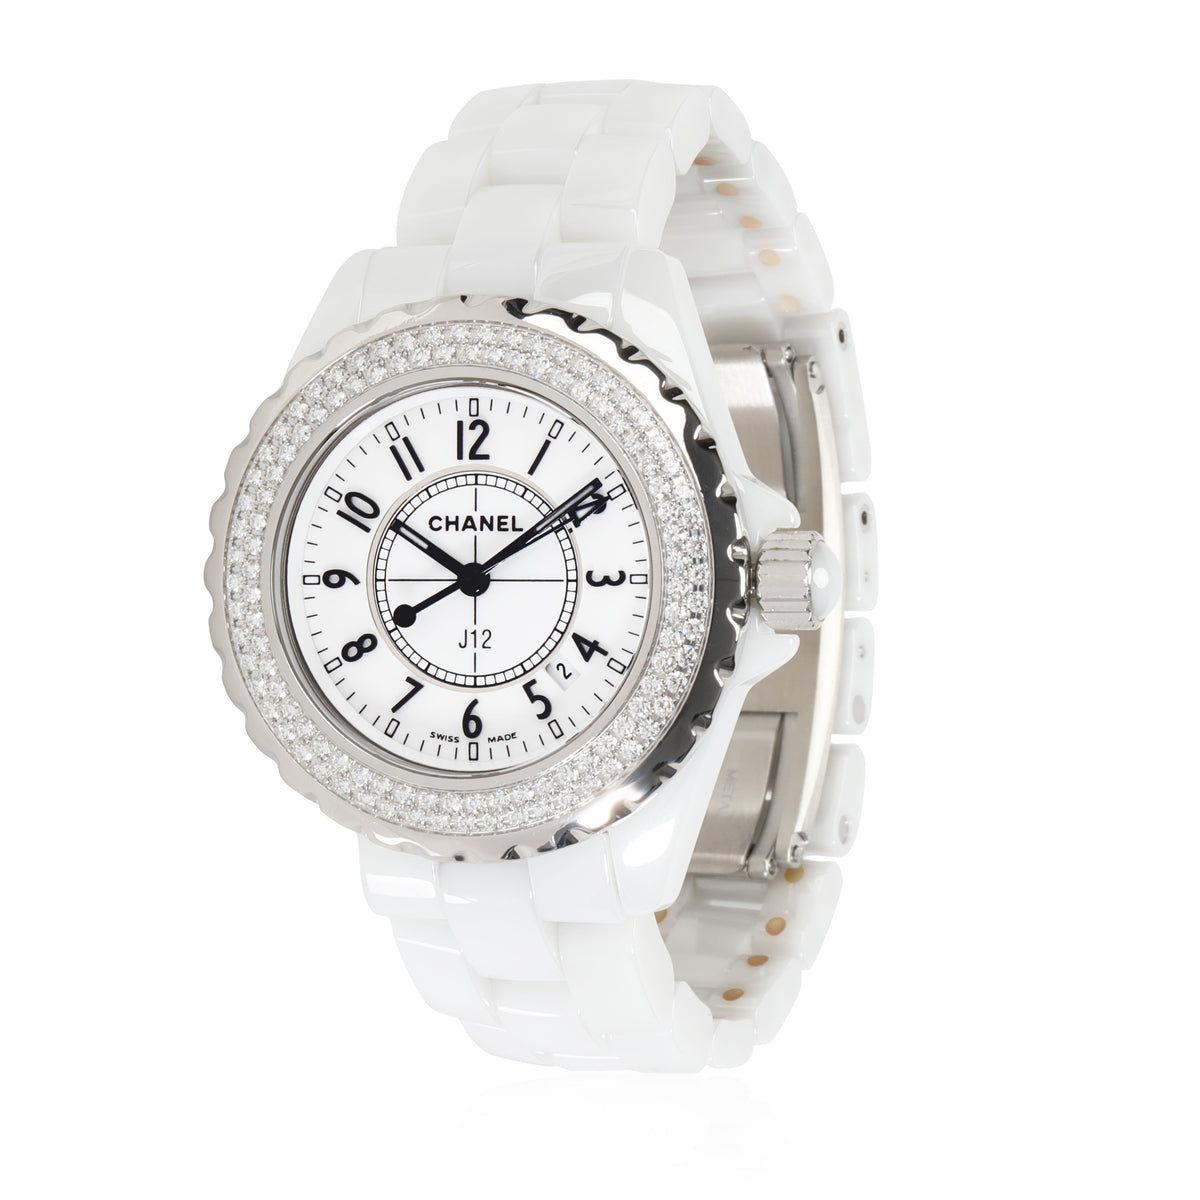 Chanel J12 H0967 Womens Watch in Stainless SteelCeramic  myGemma  Item  111231